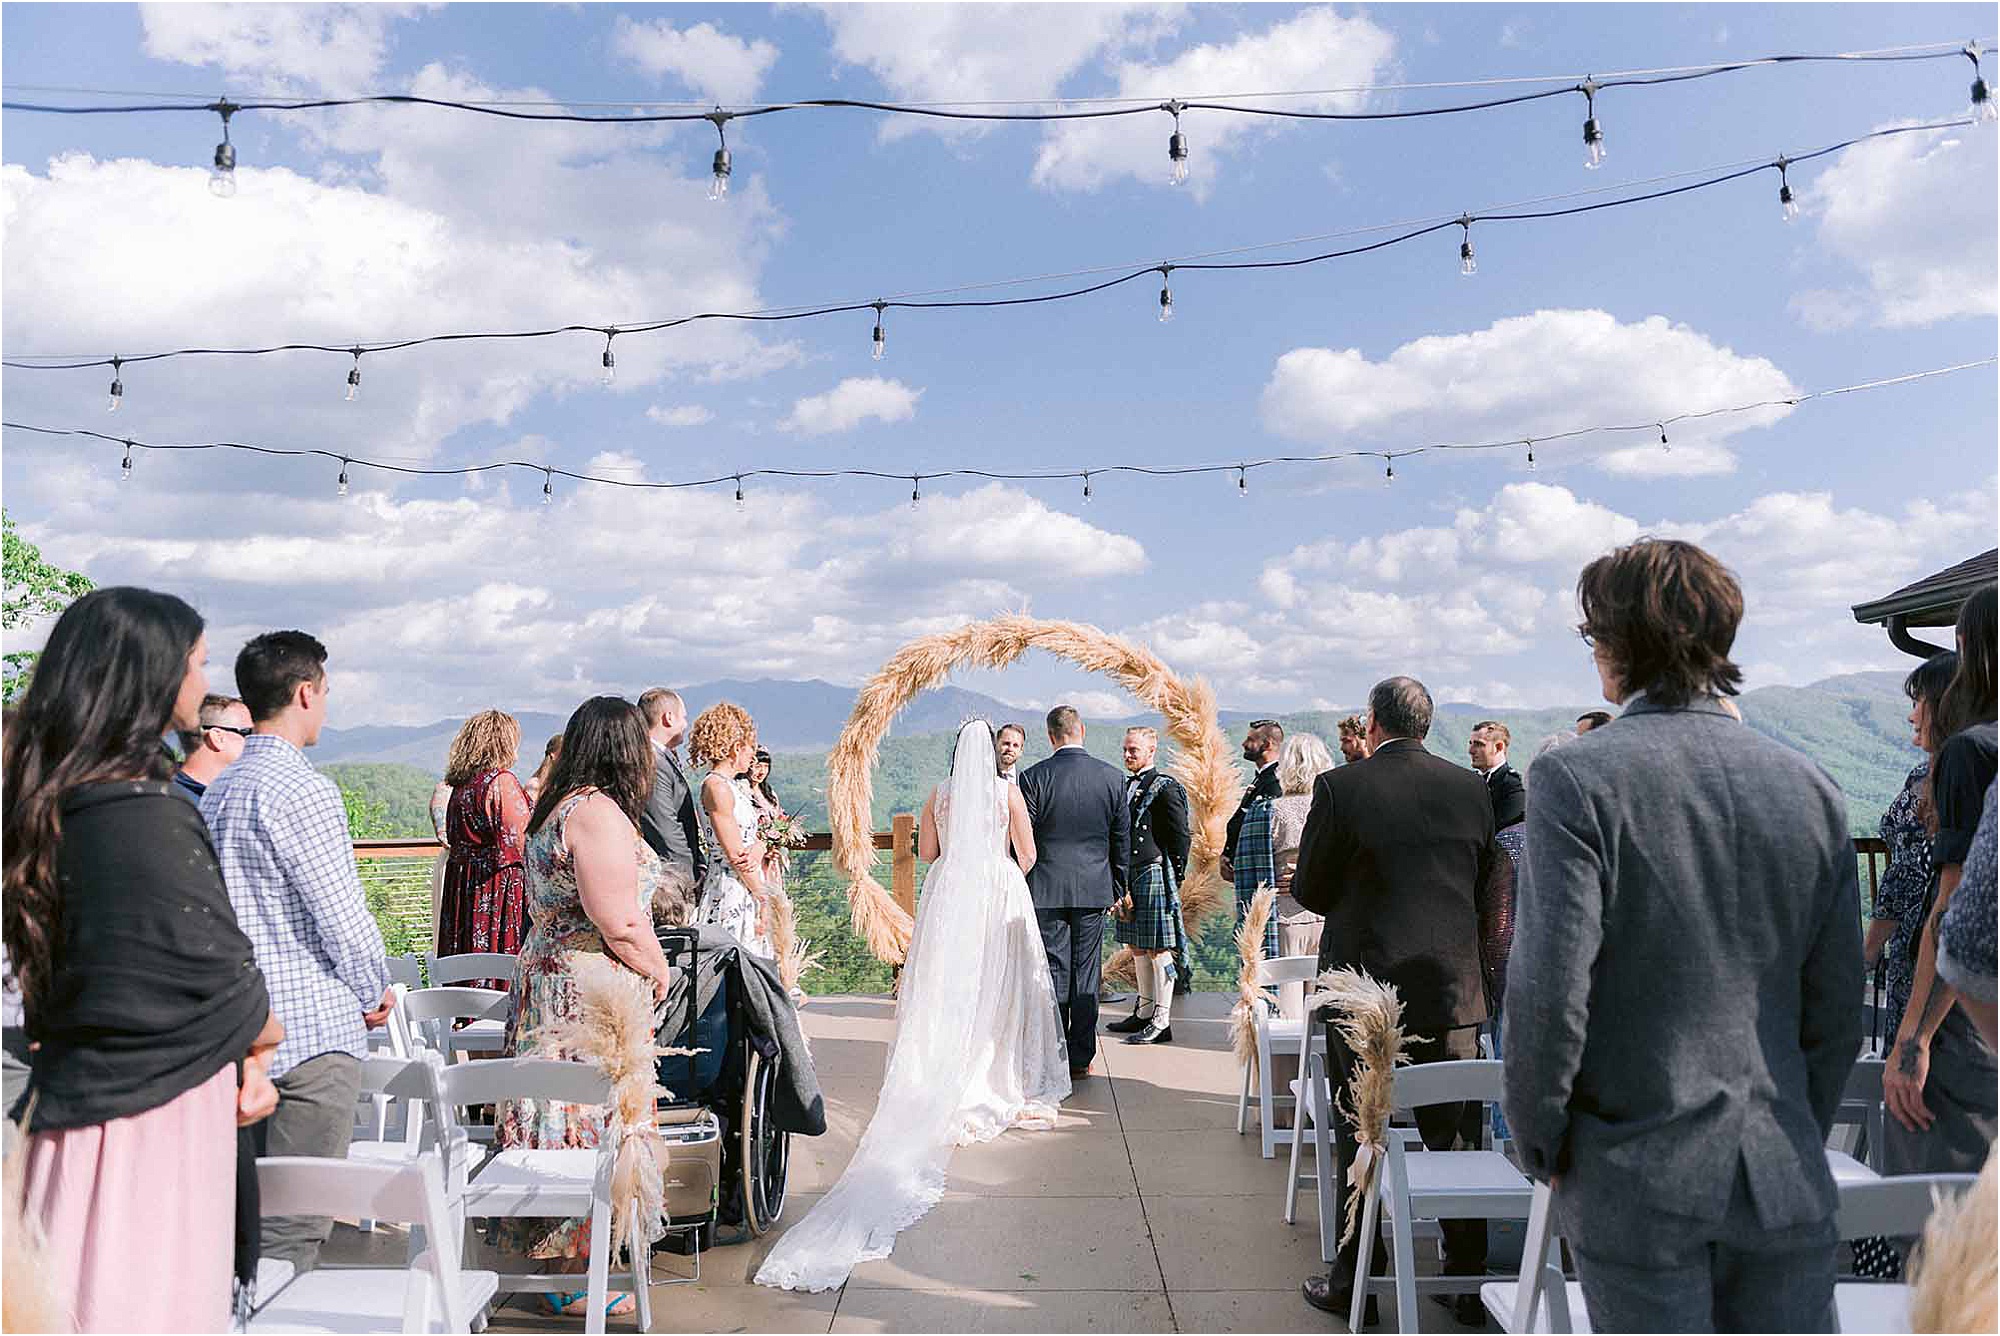 outdoor wedding ceremony overlooking the mountains